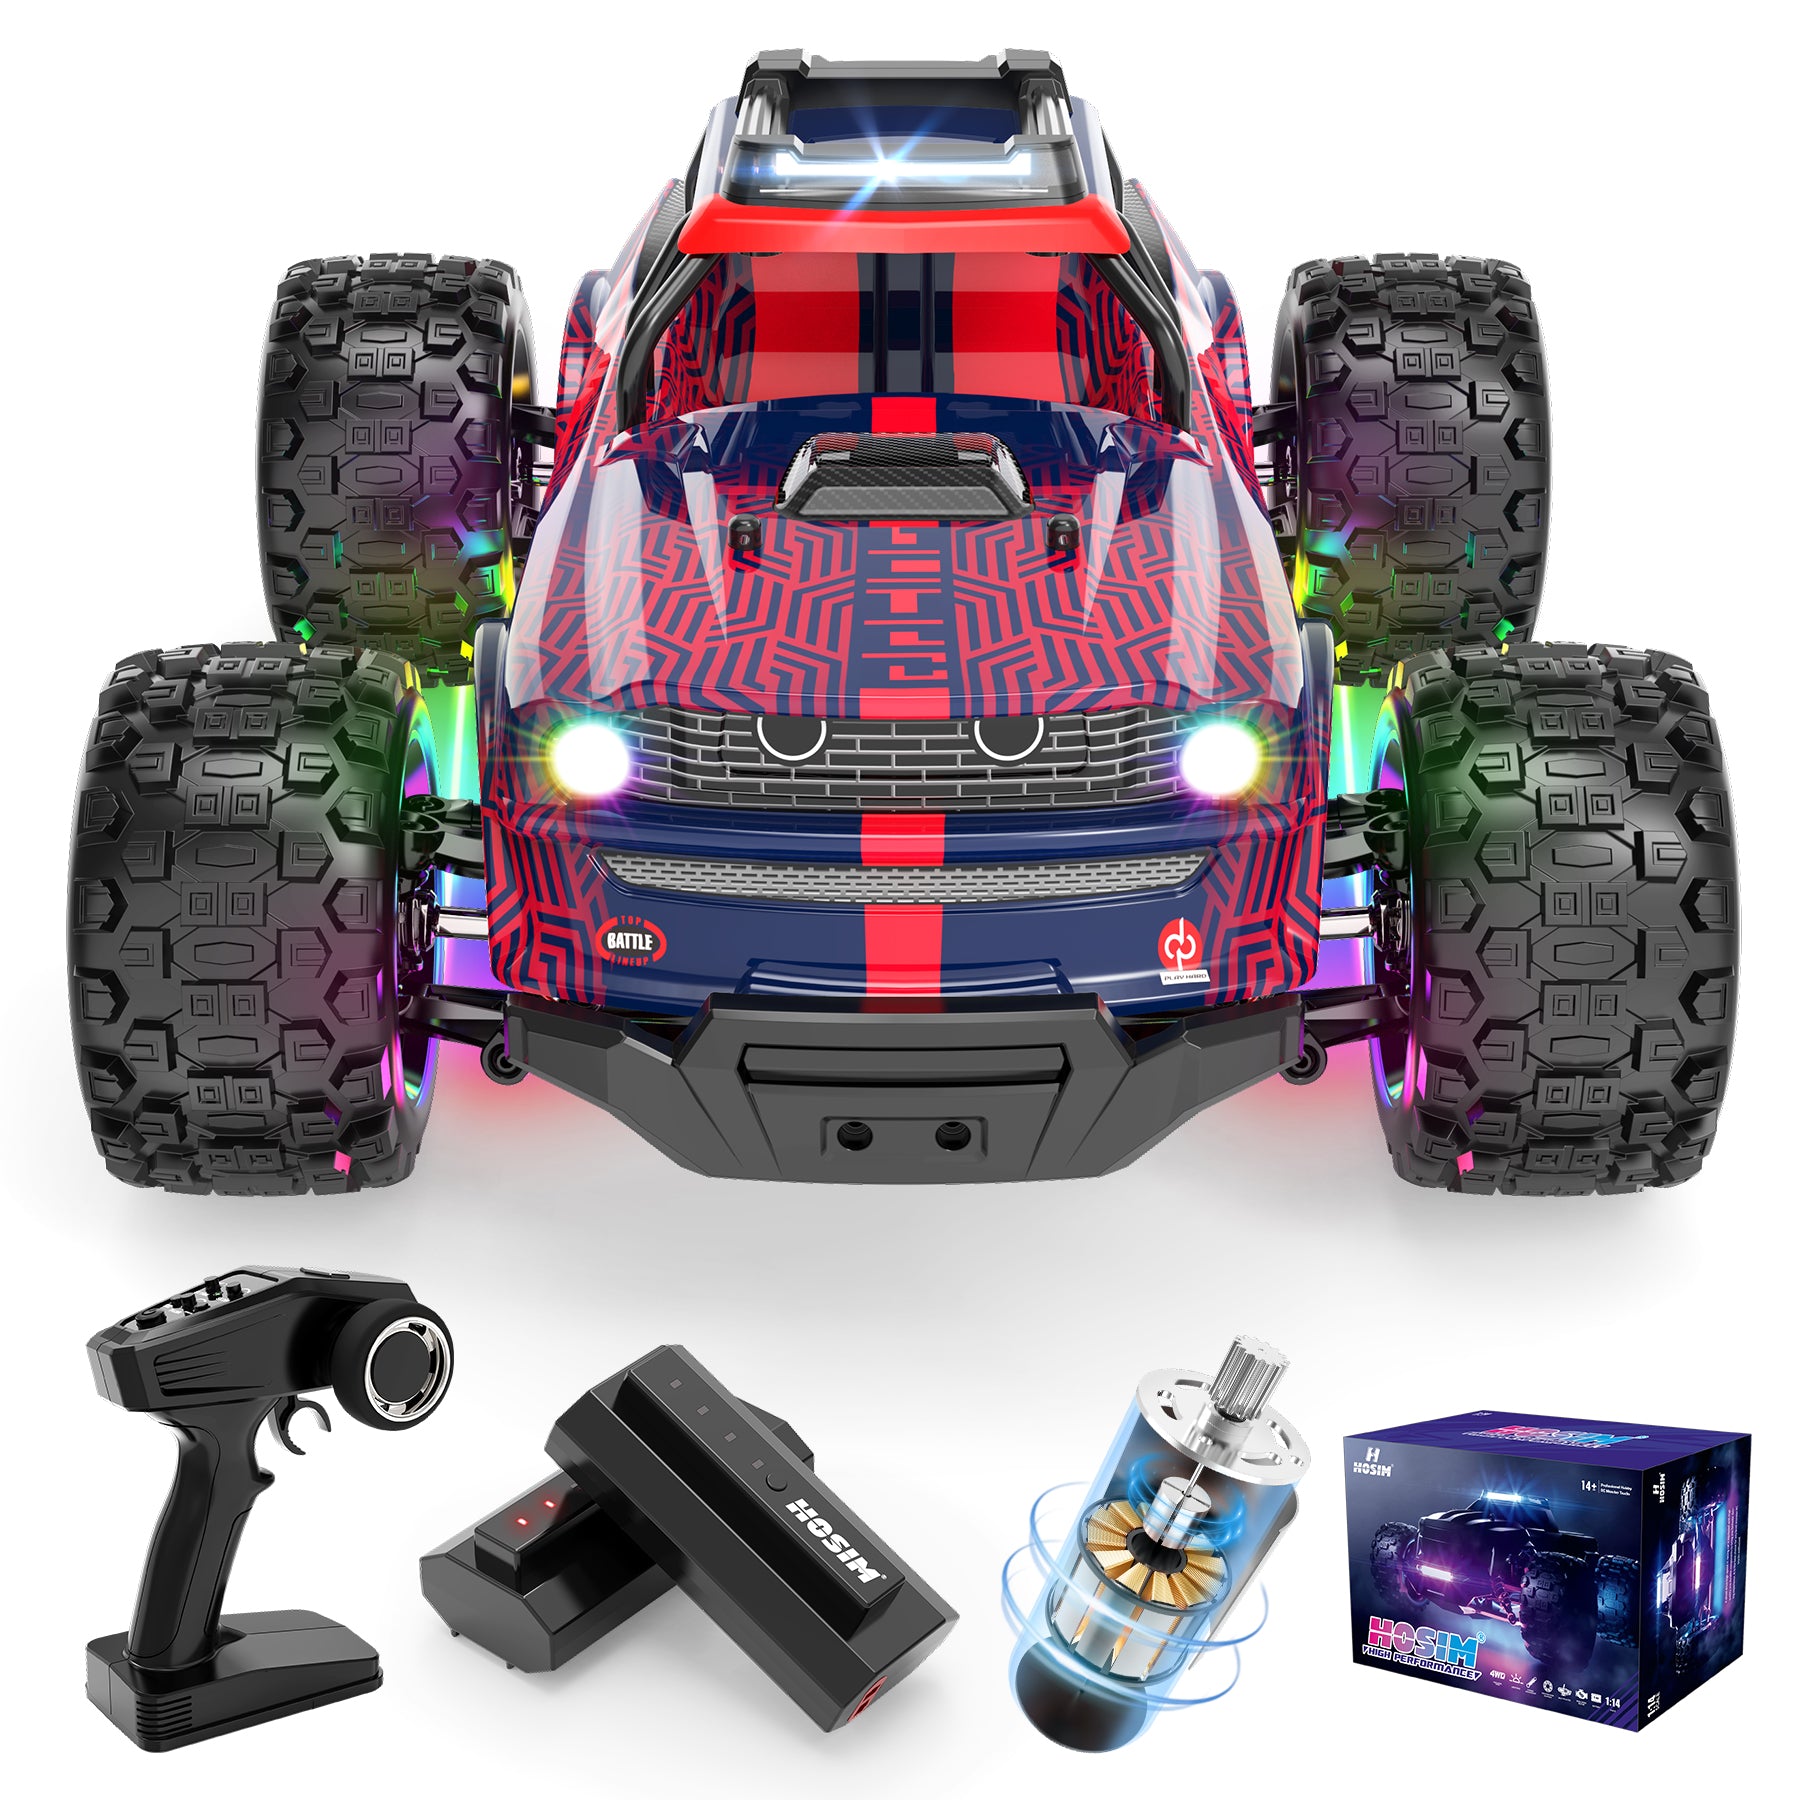 Hosim 1:14 4X4  RC Cars with headlights for Adults,High Speed Remote Control Car RC Trucks,Toy Crawler Electric  Vehicle Car Gift for Kids Red